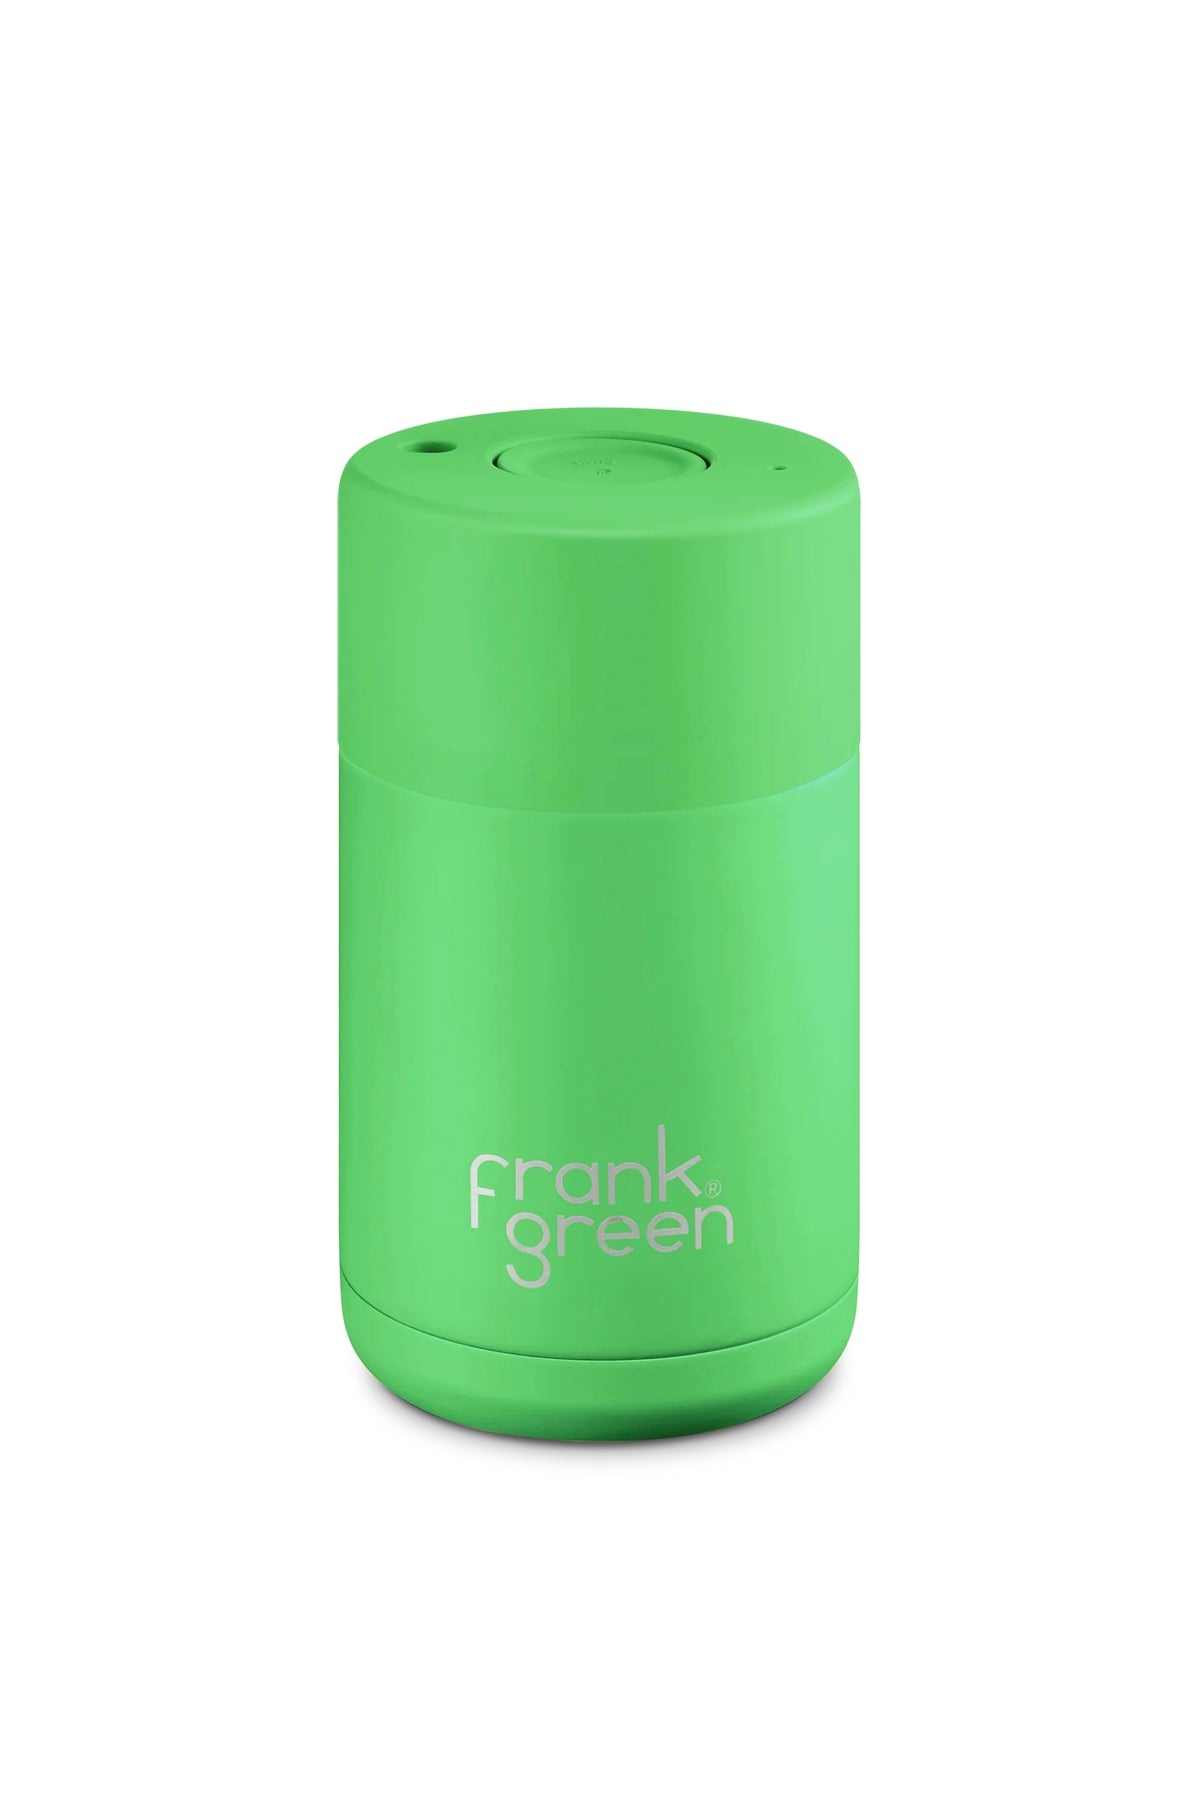 10oz Ceramic Reusable Cup Neon Green With Push Button Lid